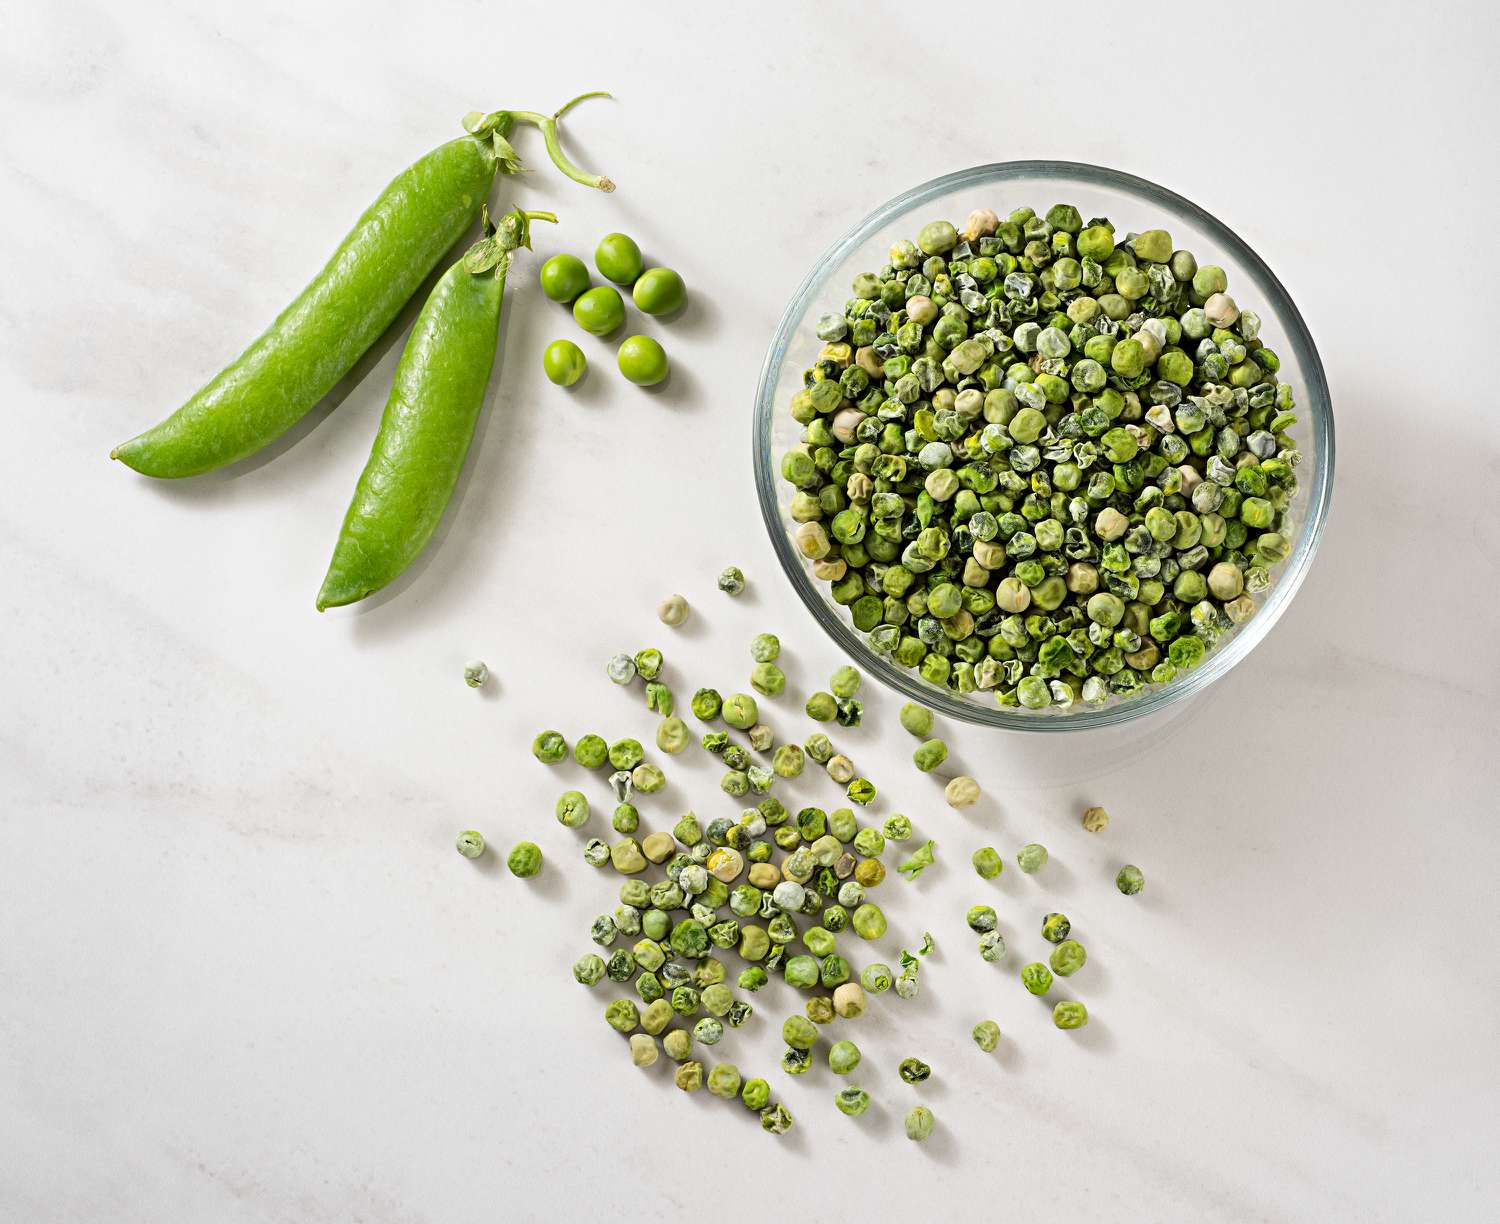 peas and beans for high fiber vegetables